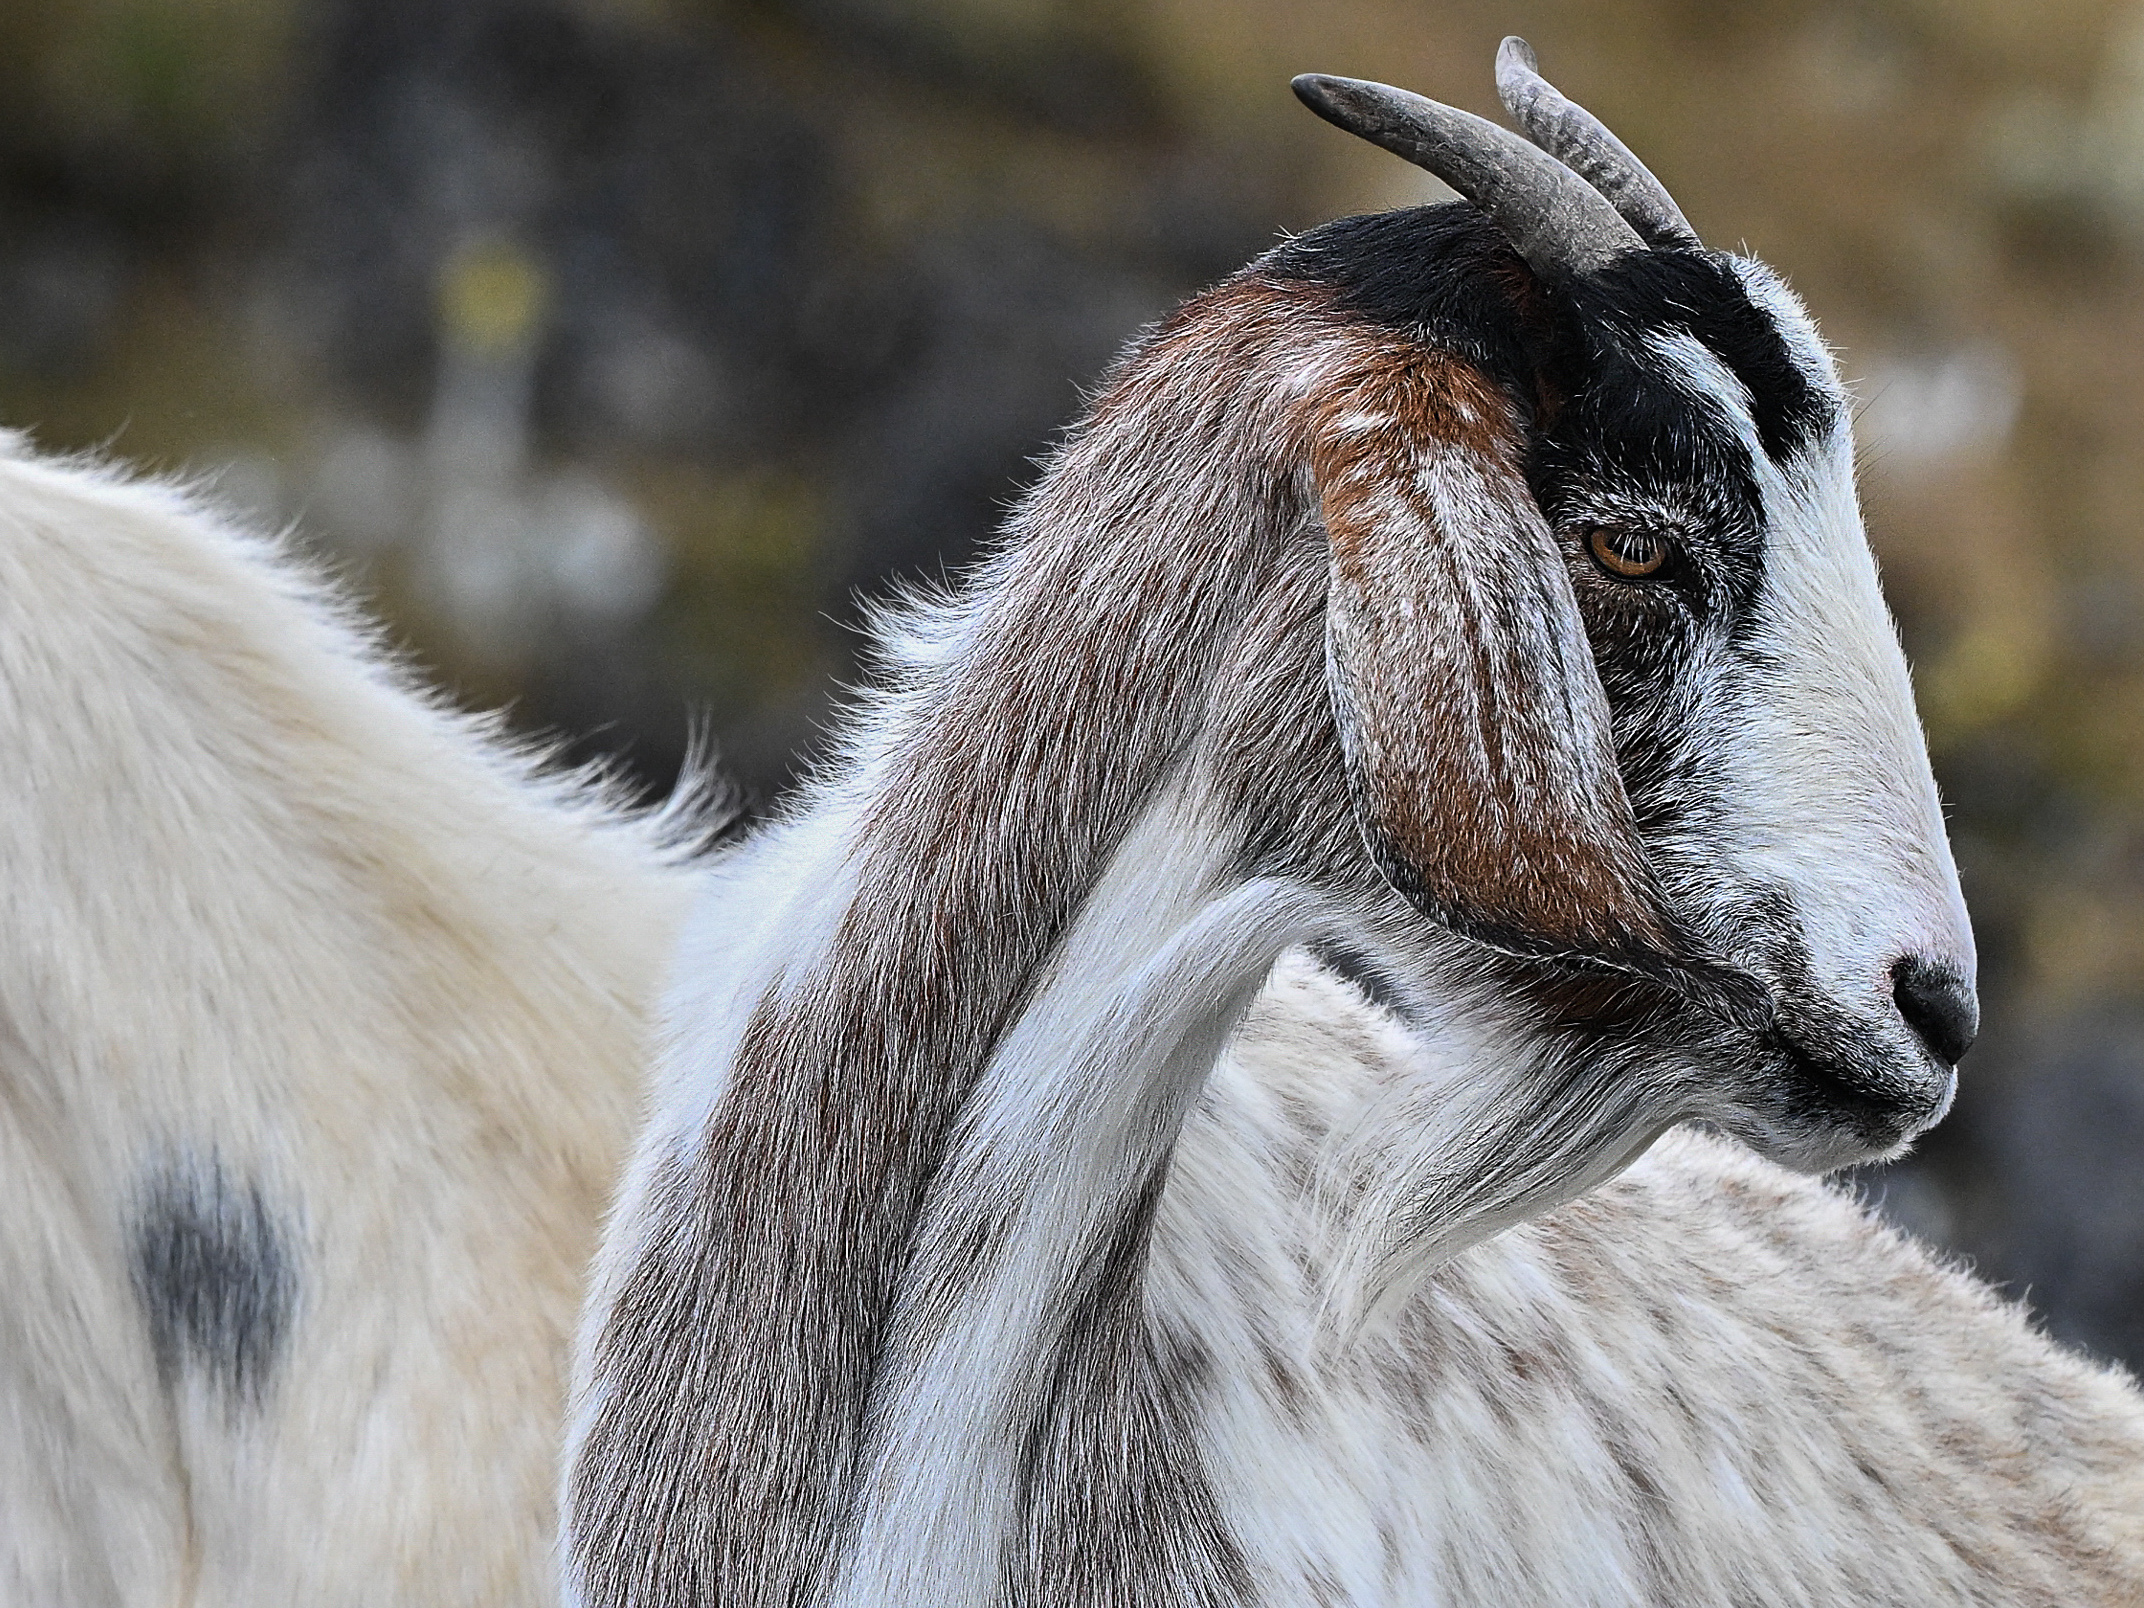 Hey lil’ goat, can you tell the difference between a happy voice and an angry voice?